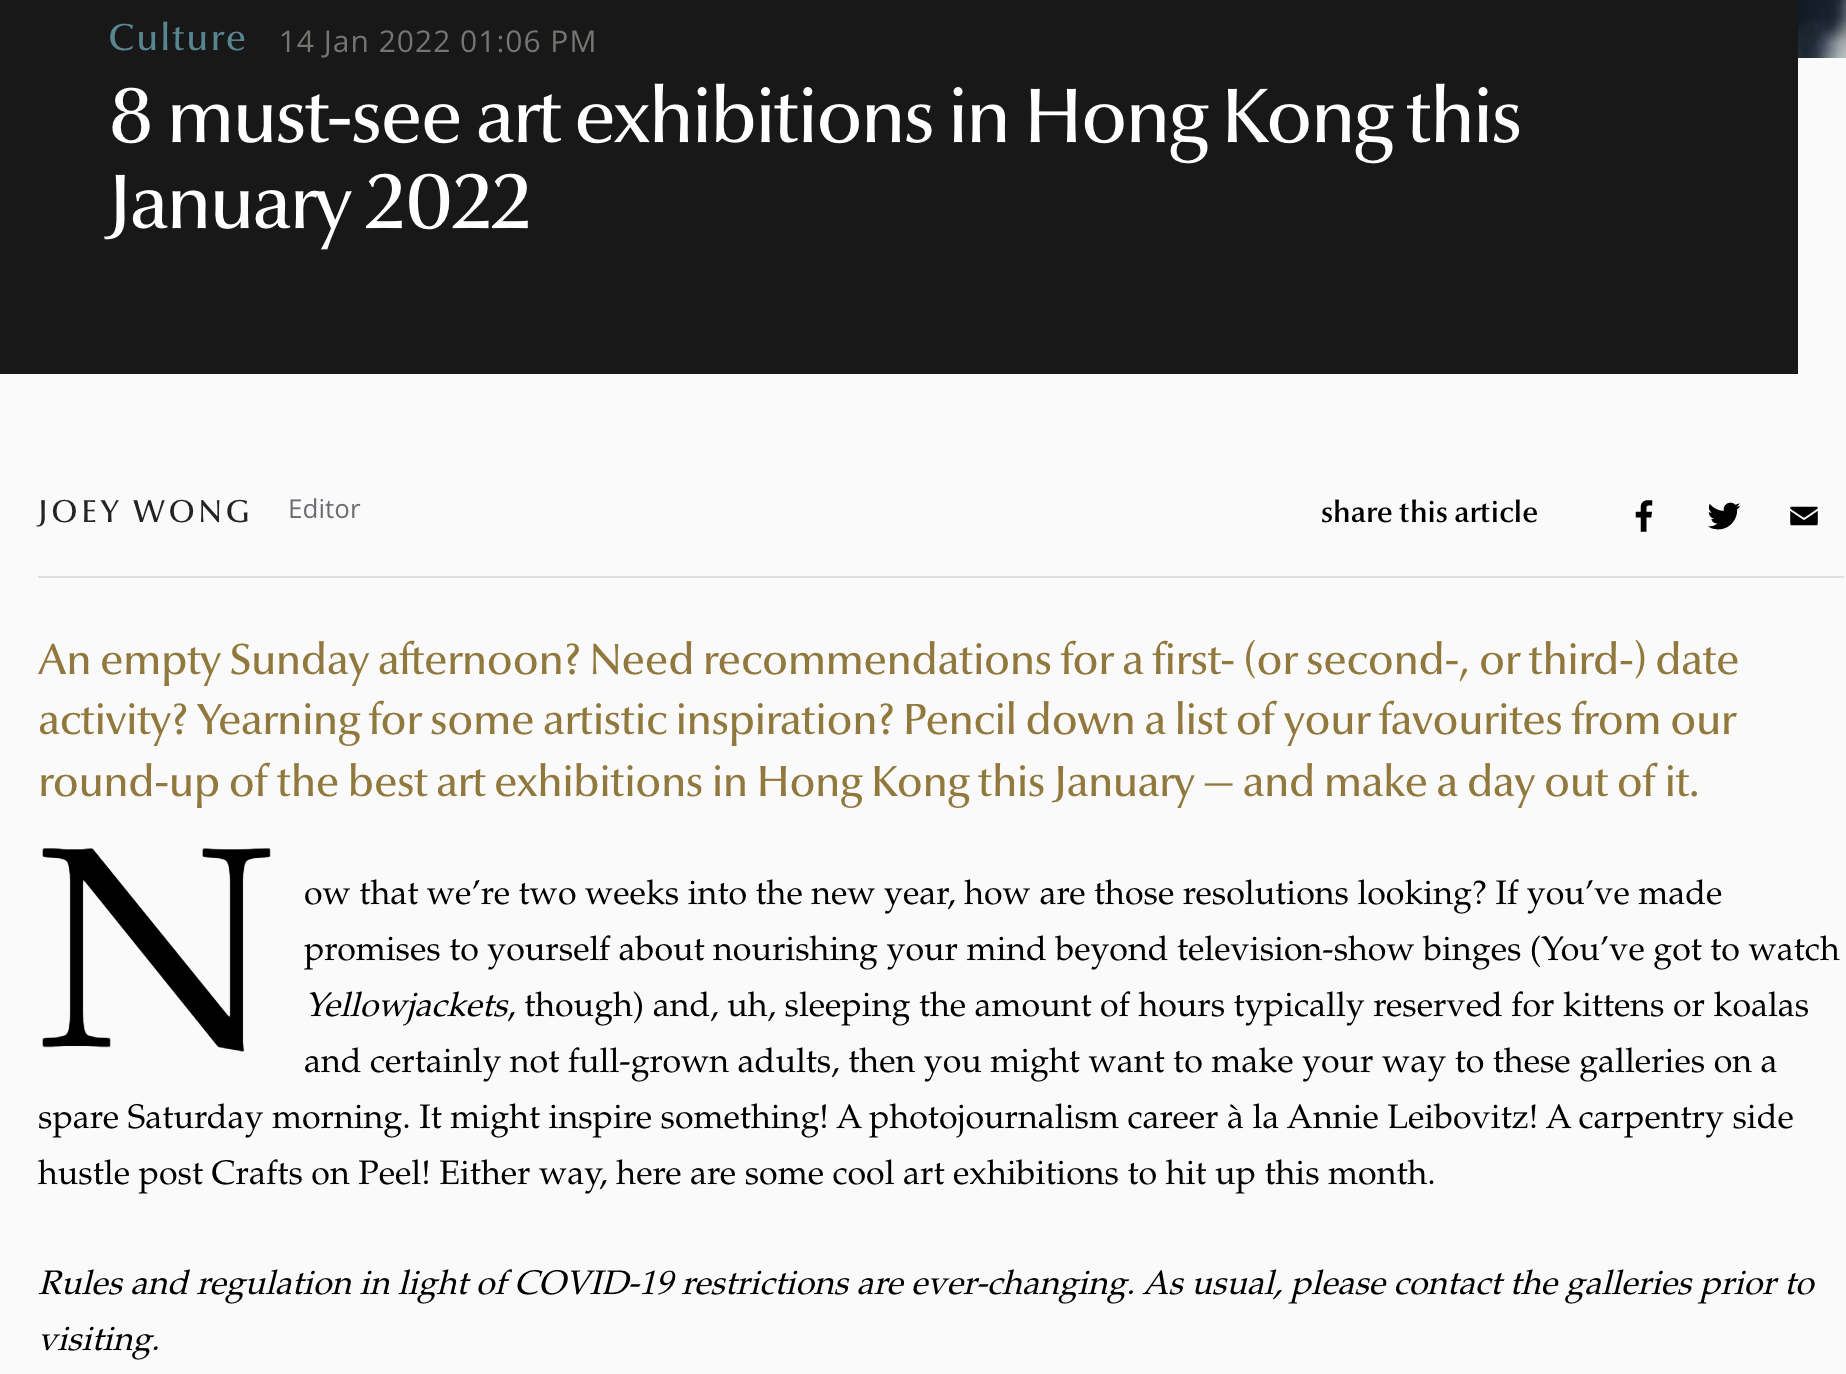 8 must-see art exhibitions in Hong Kong this January 2022